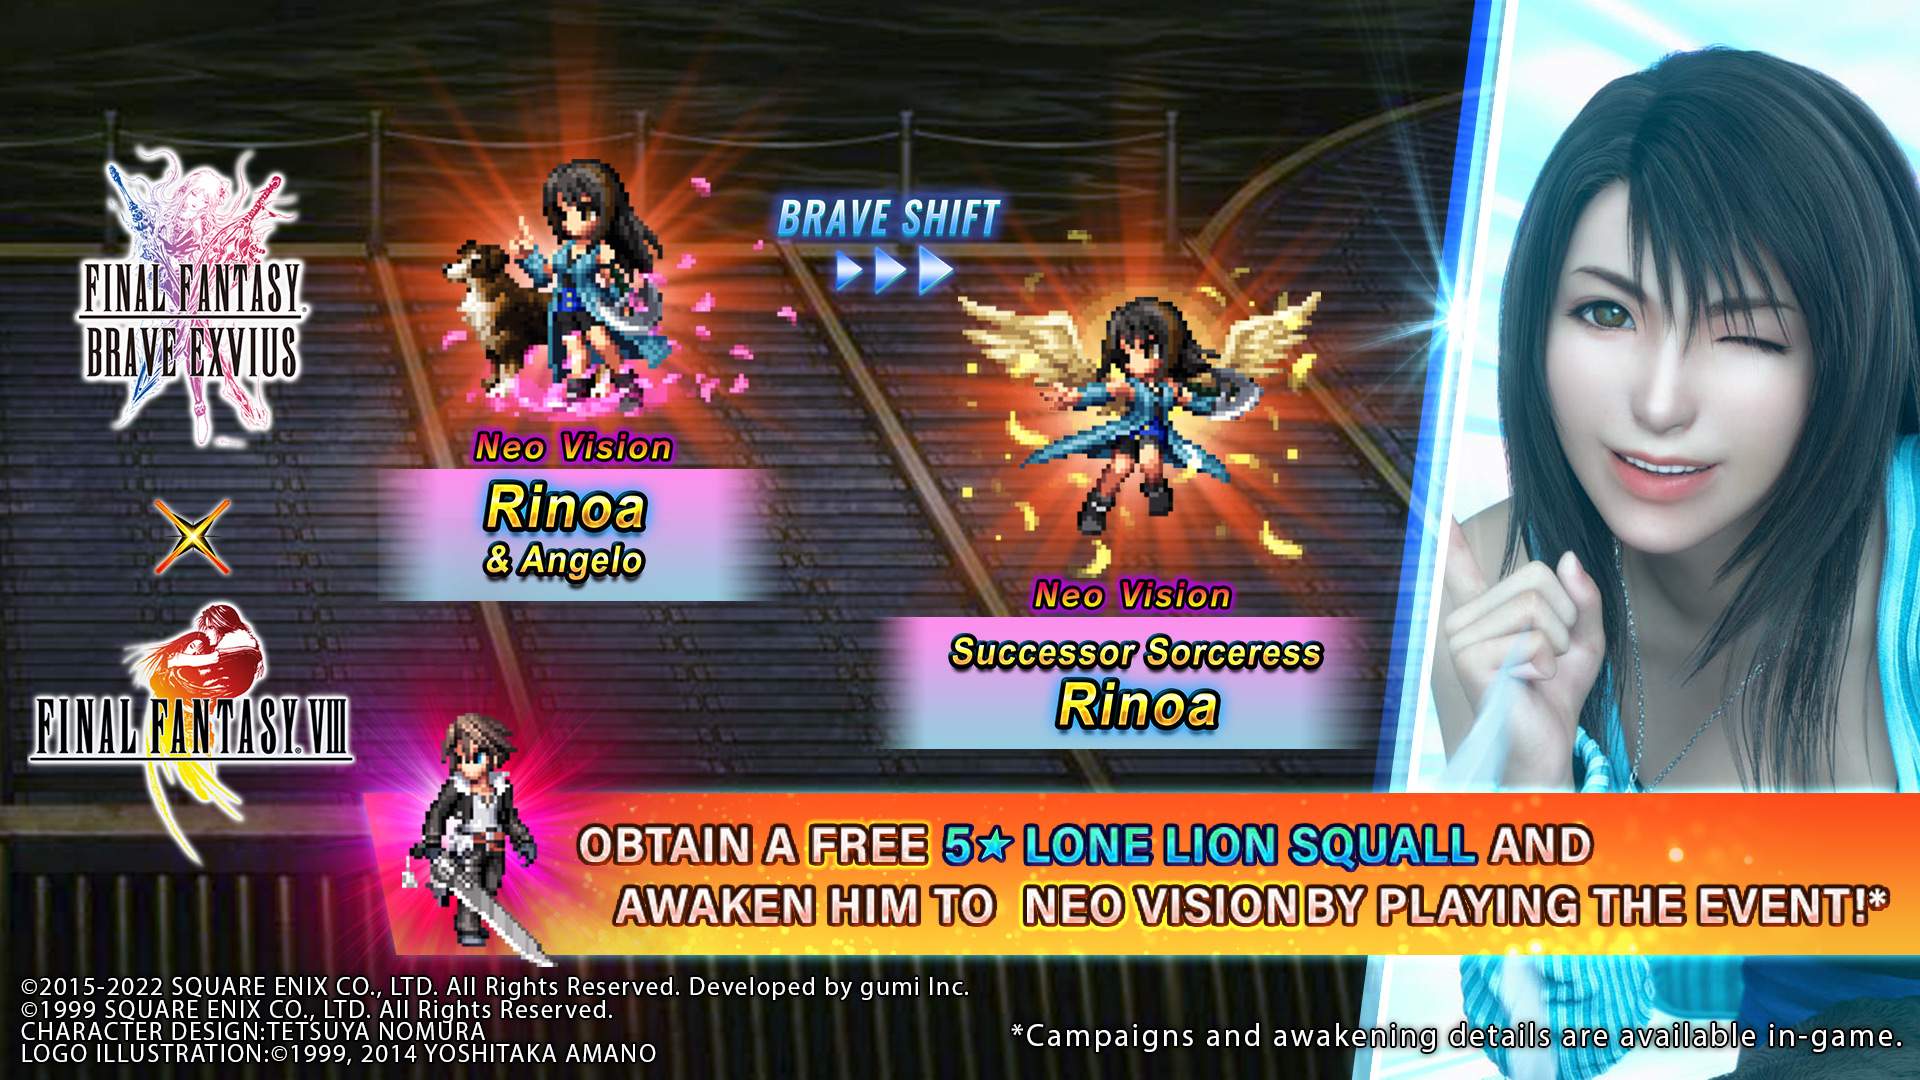 Neo Vision Rinoa & Angelo is here for the FINAL FANTASY VIII Collab